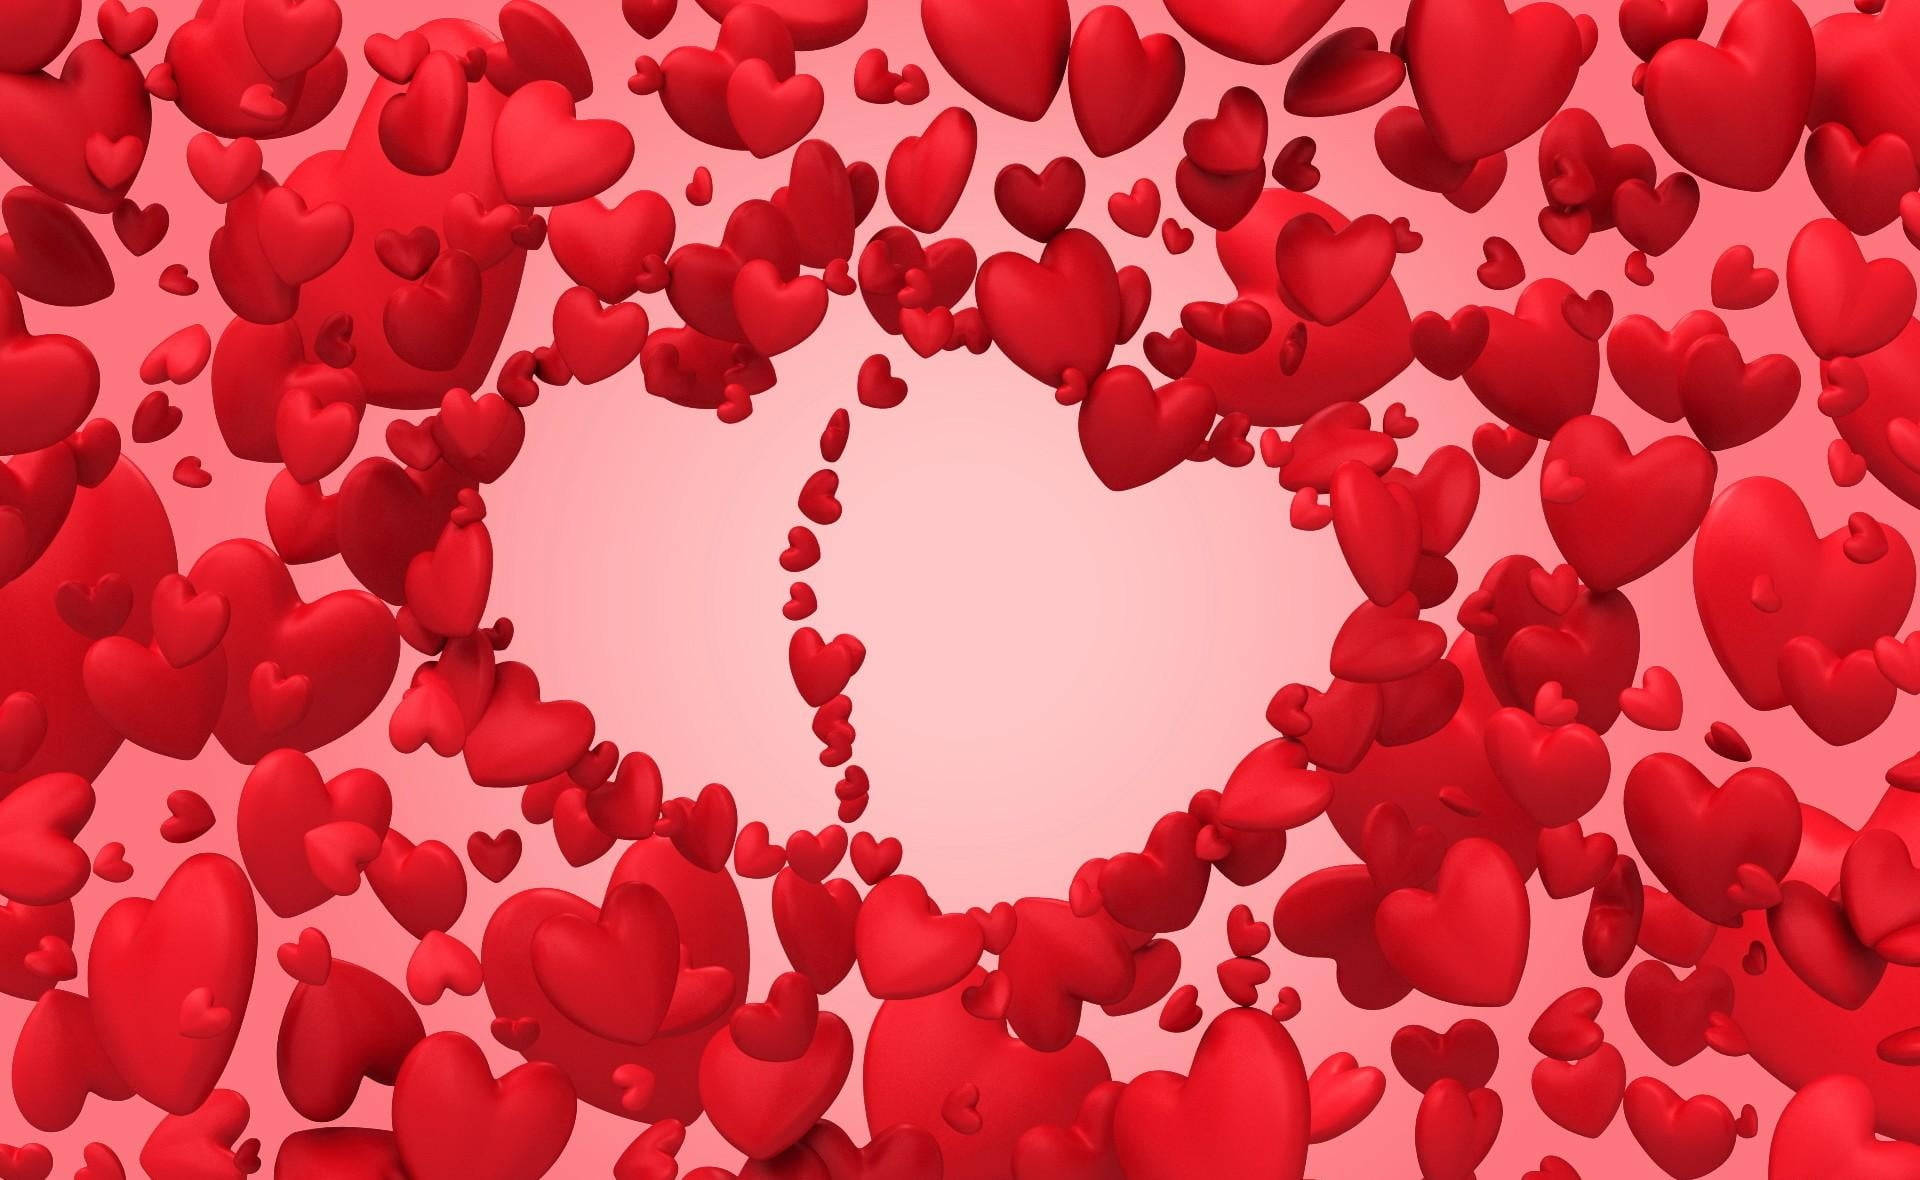 Awesome Red Heart Texture Background